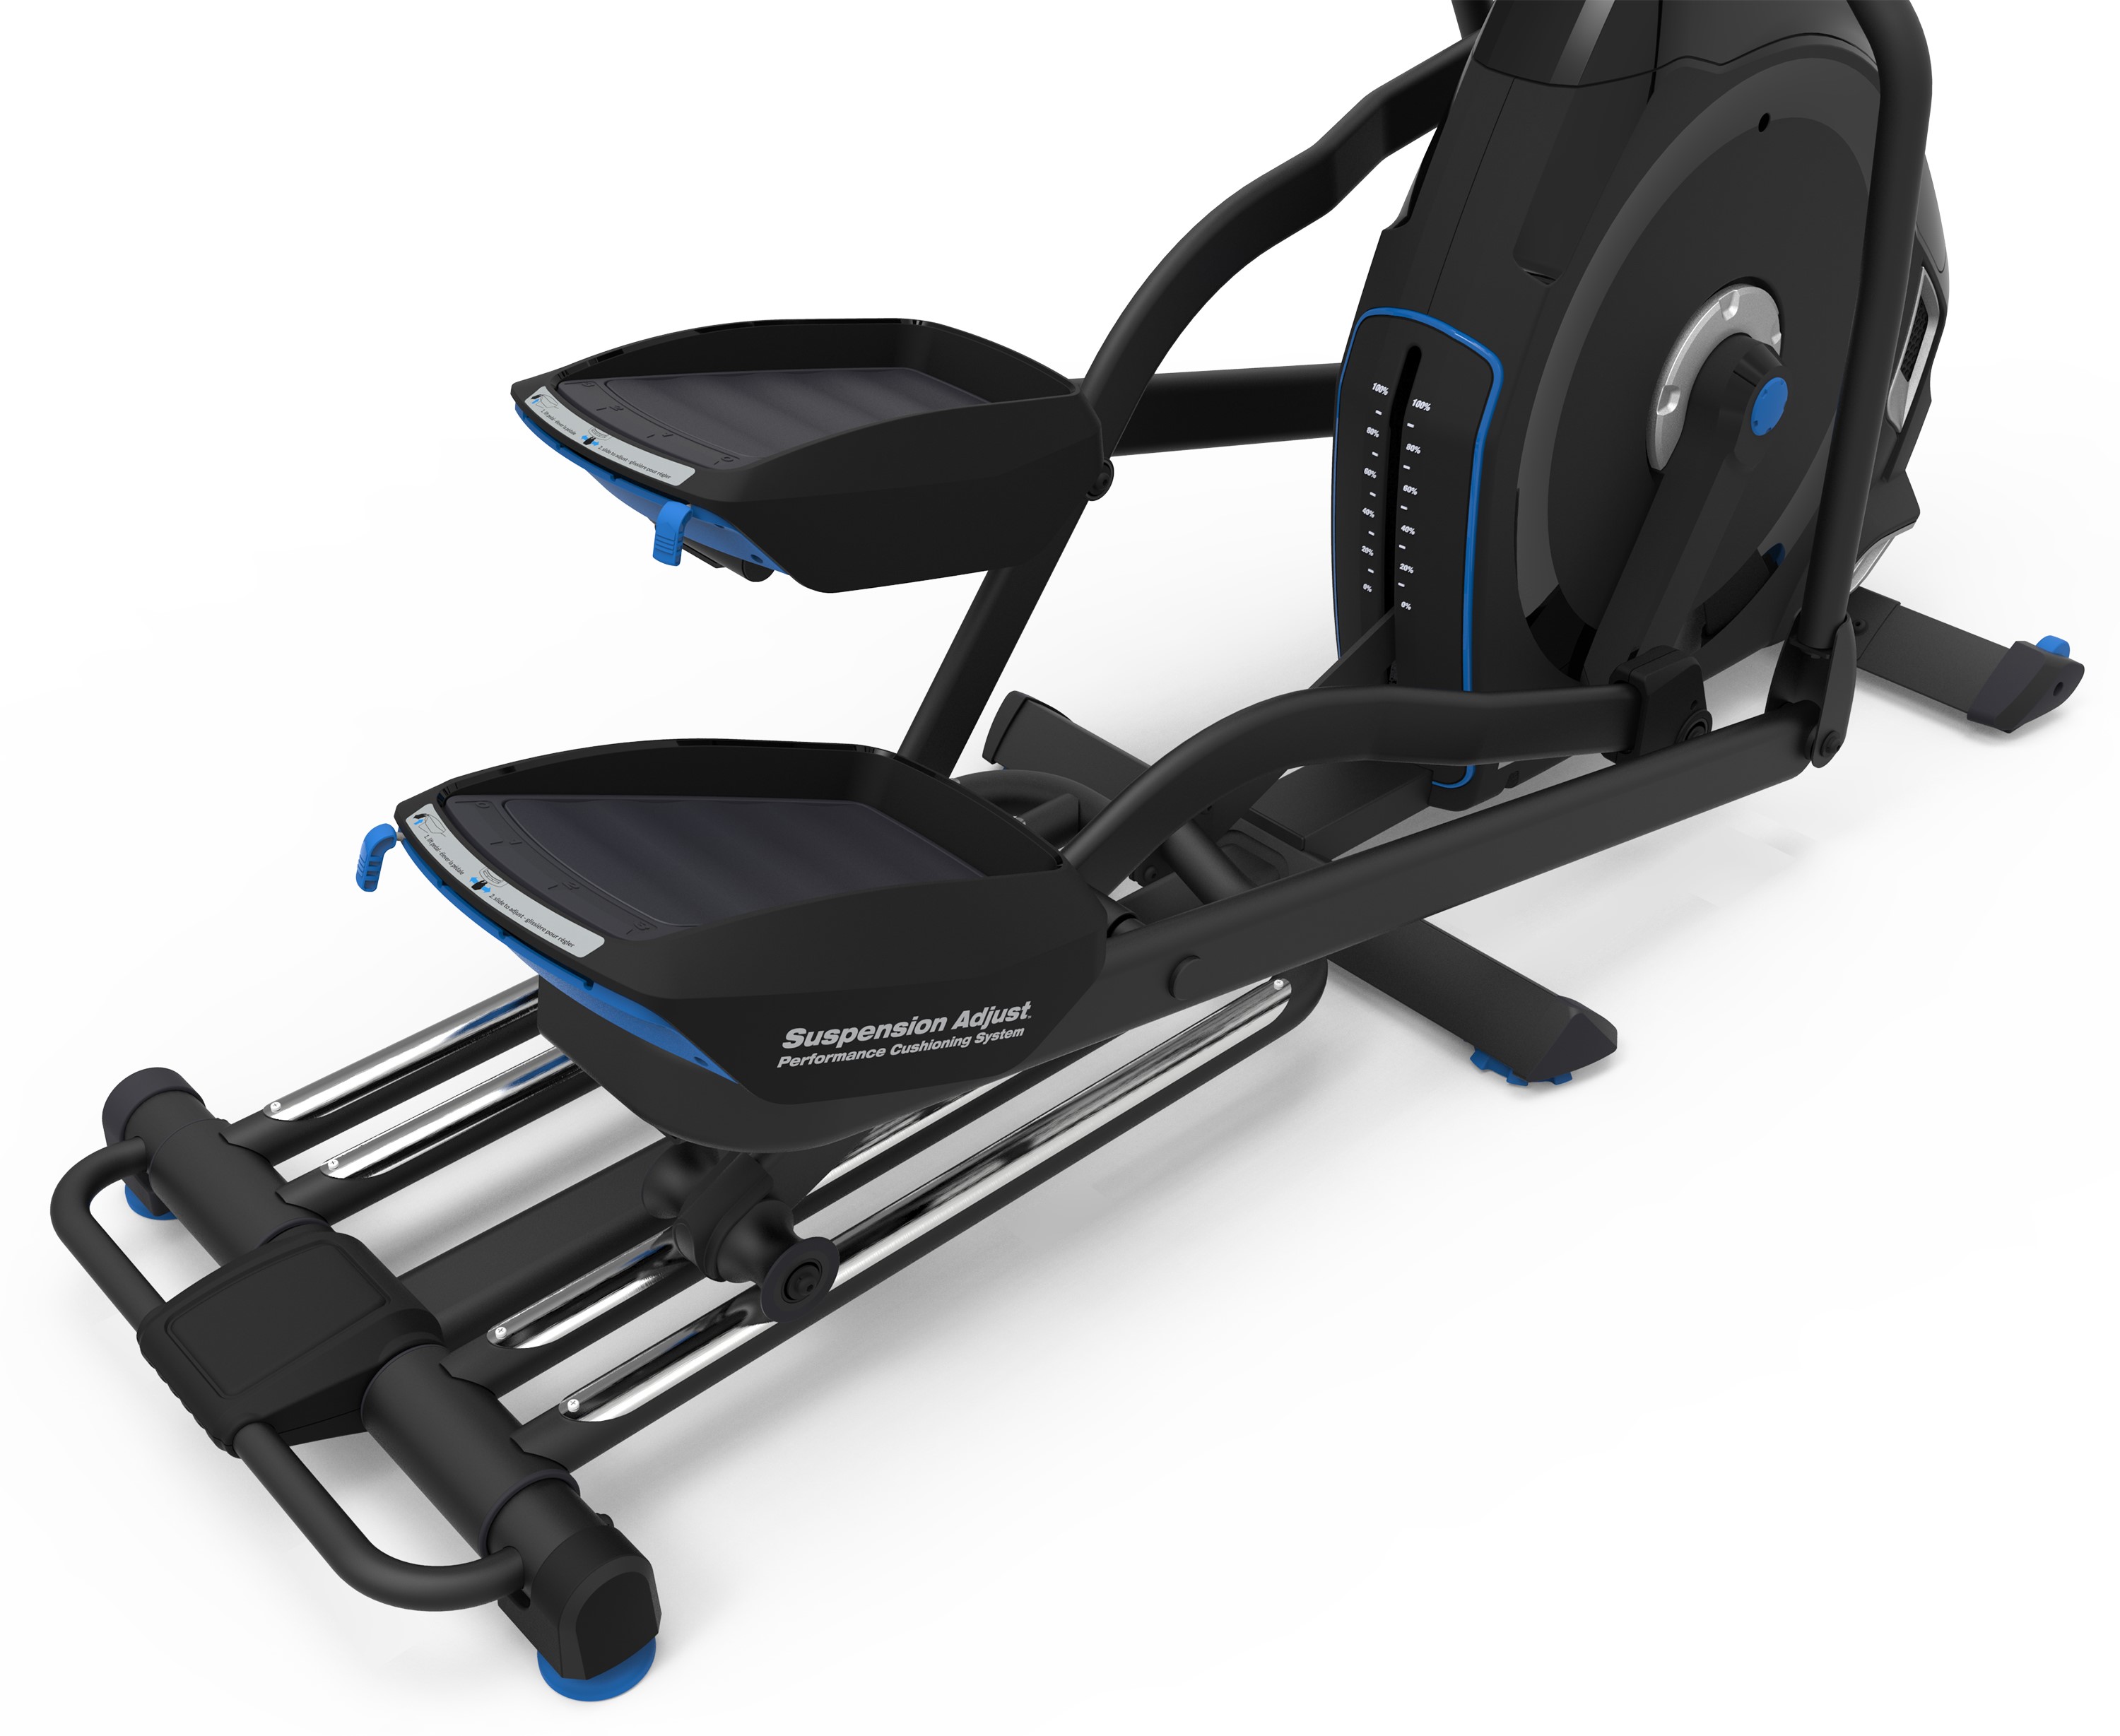 Nautilus E618 Performance Series Home and Gym Workout Cardio Elliptical Trainer - image 8 of 11